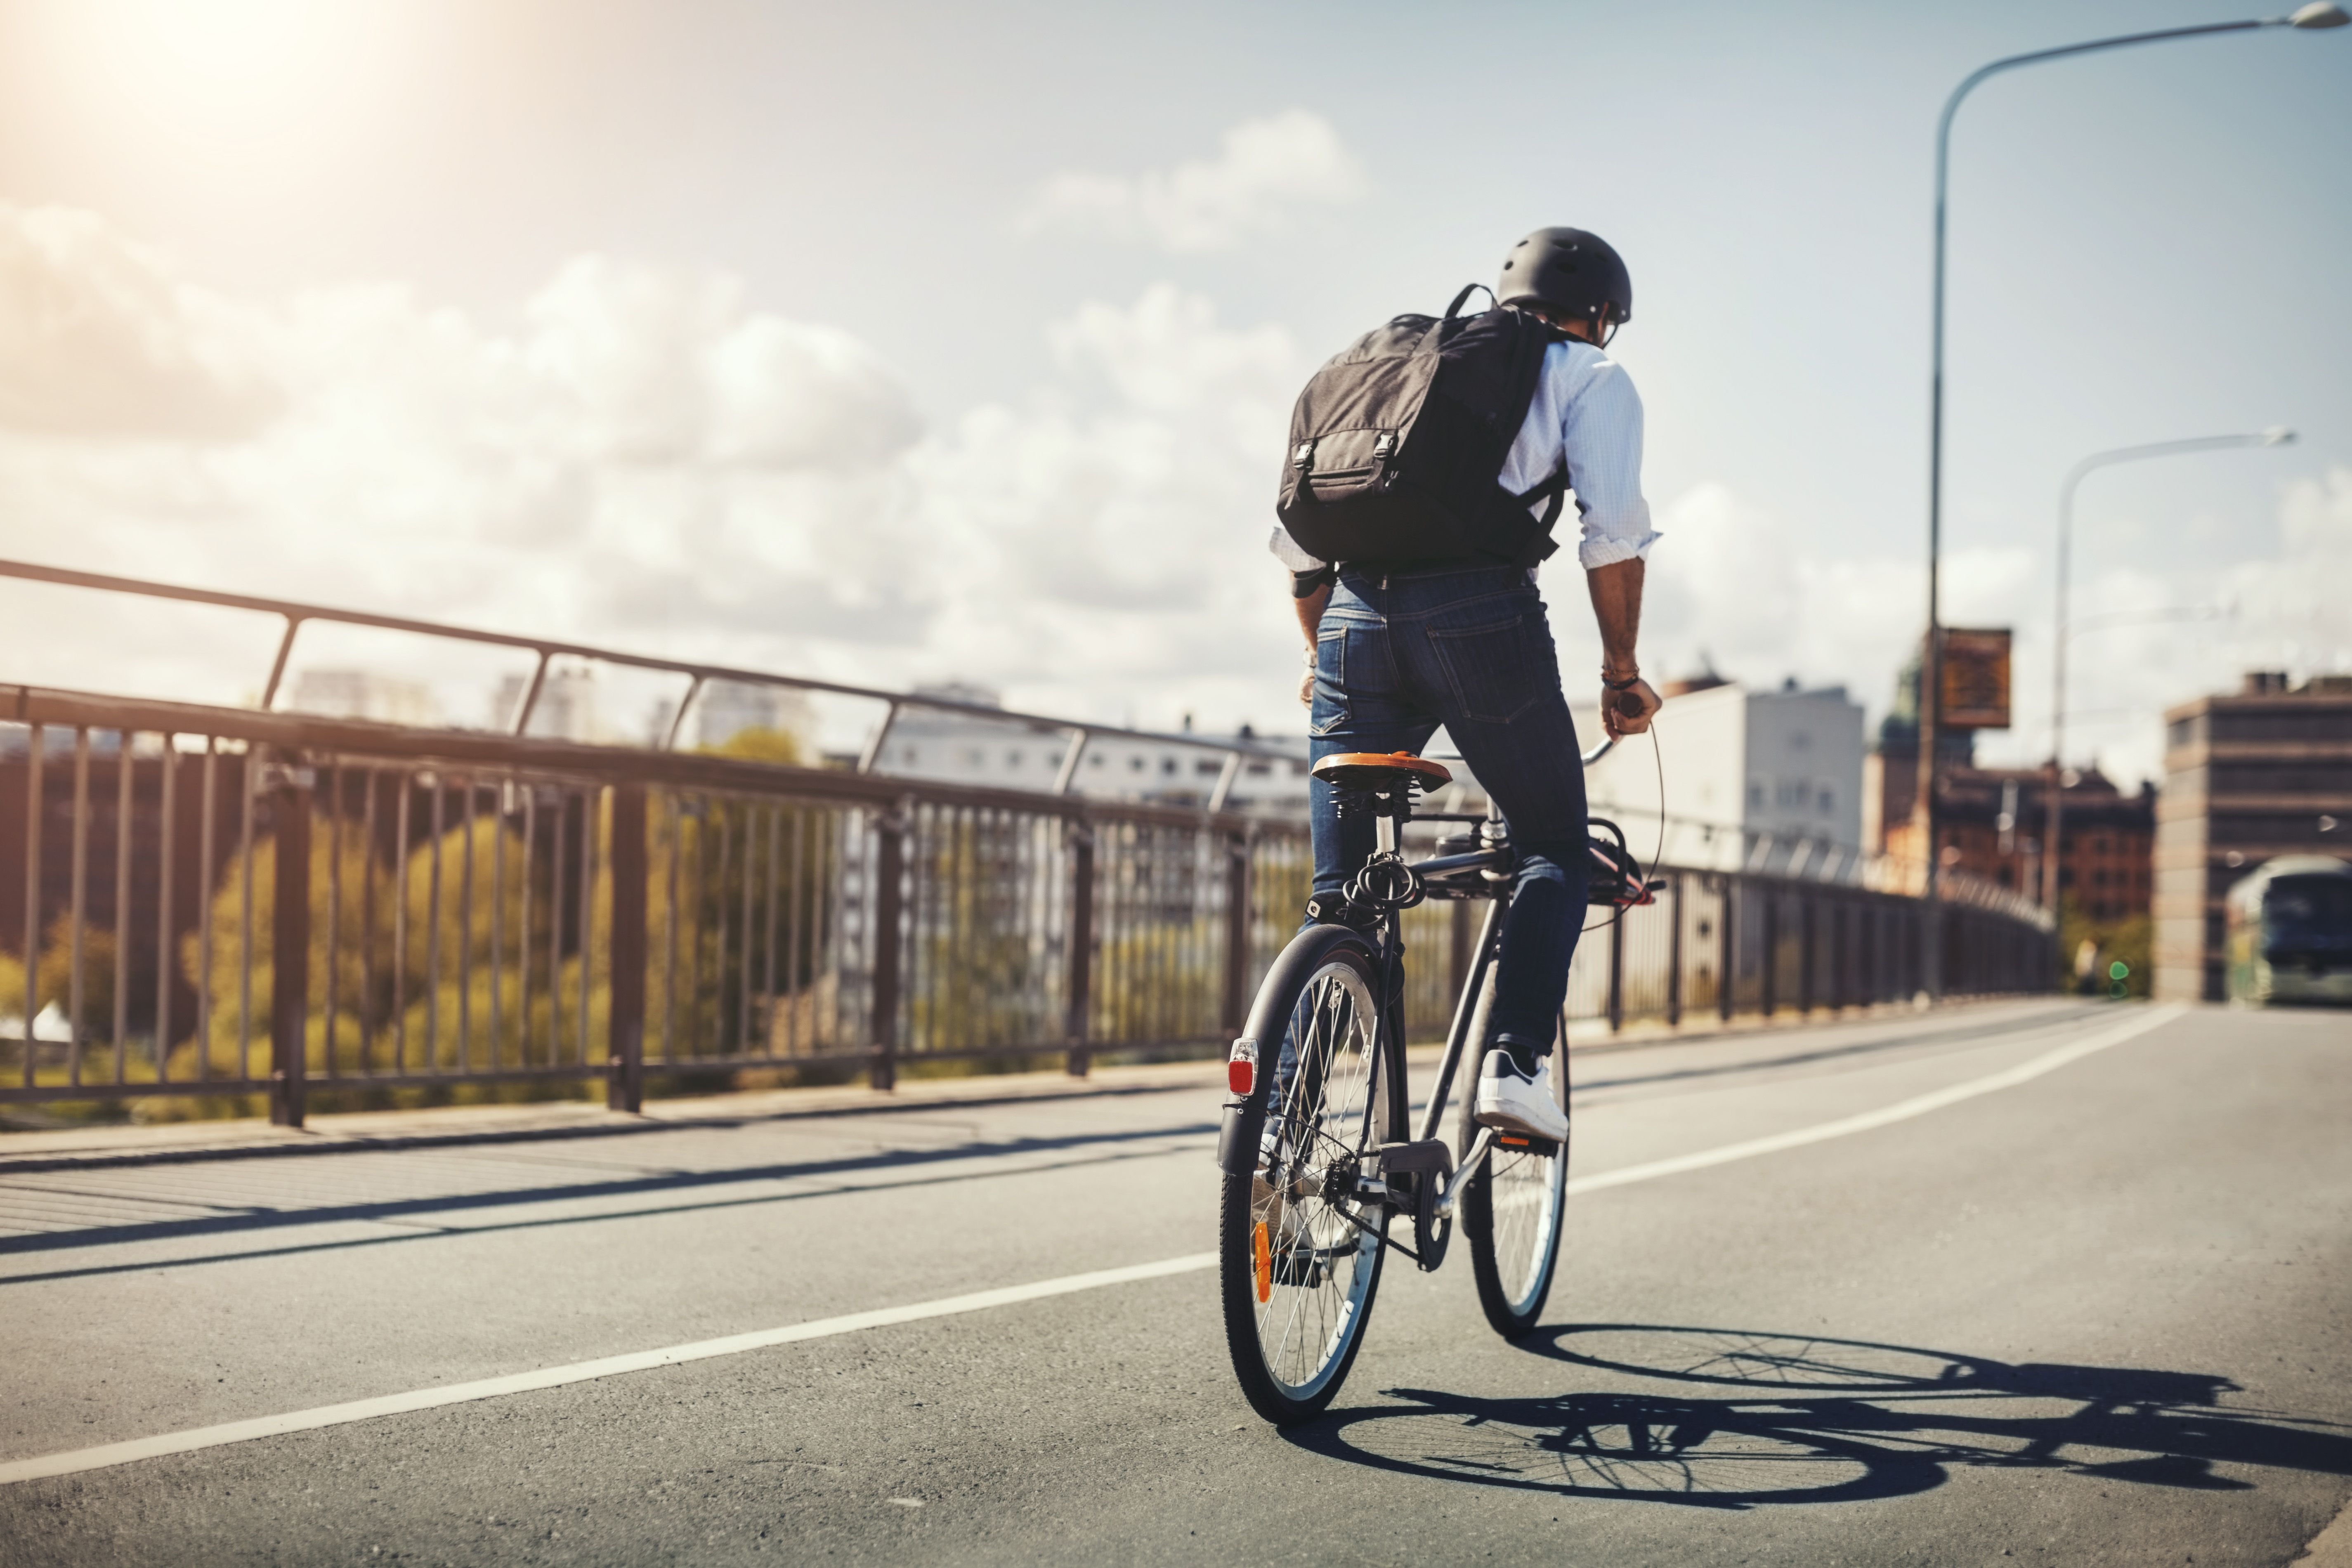 Walking and Cycling﻿ to Work Makes People Happier and More Productive